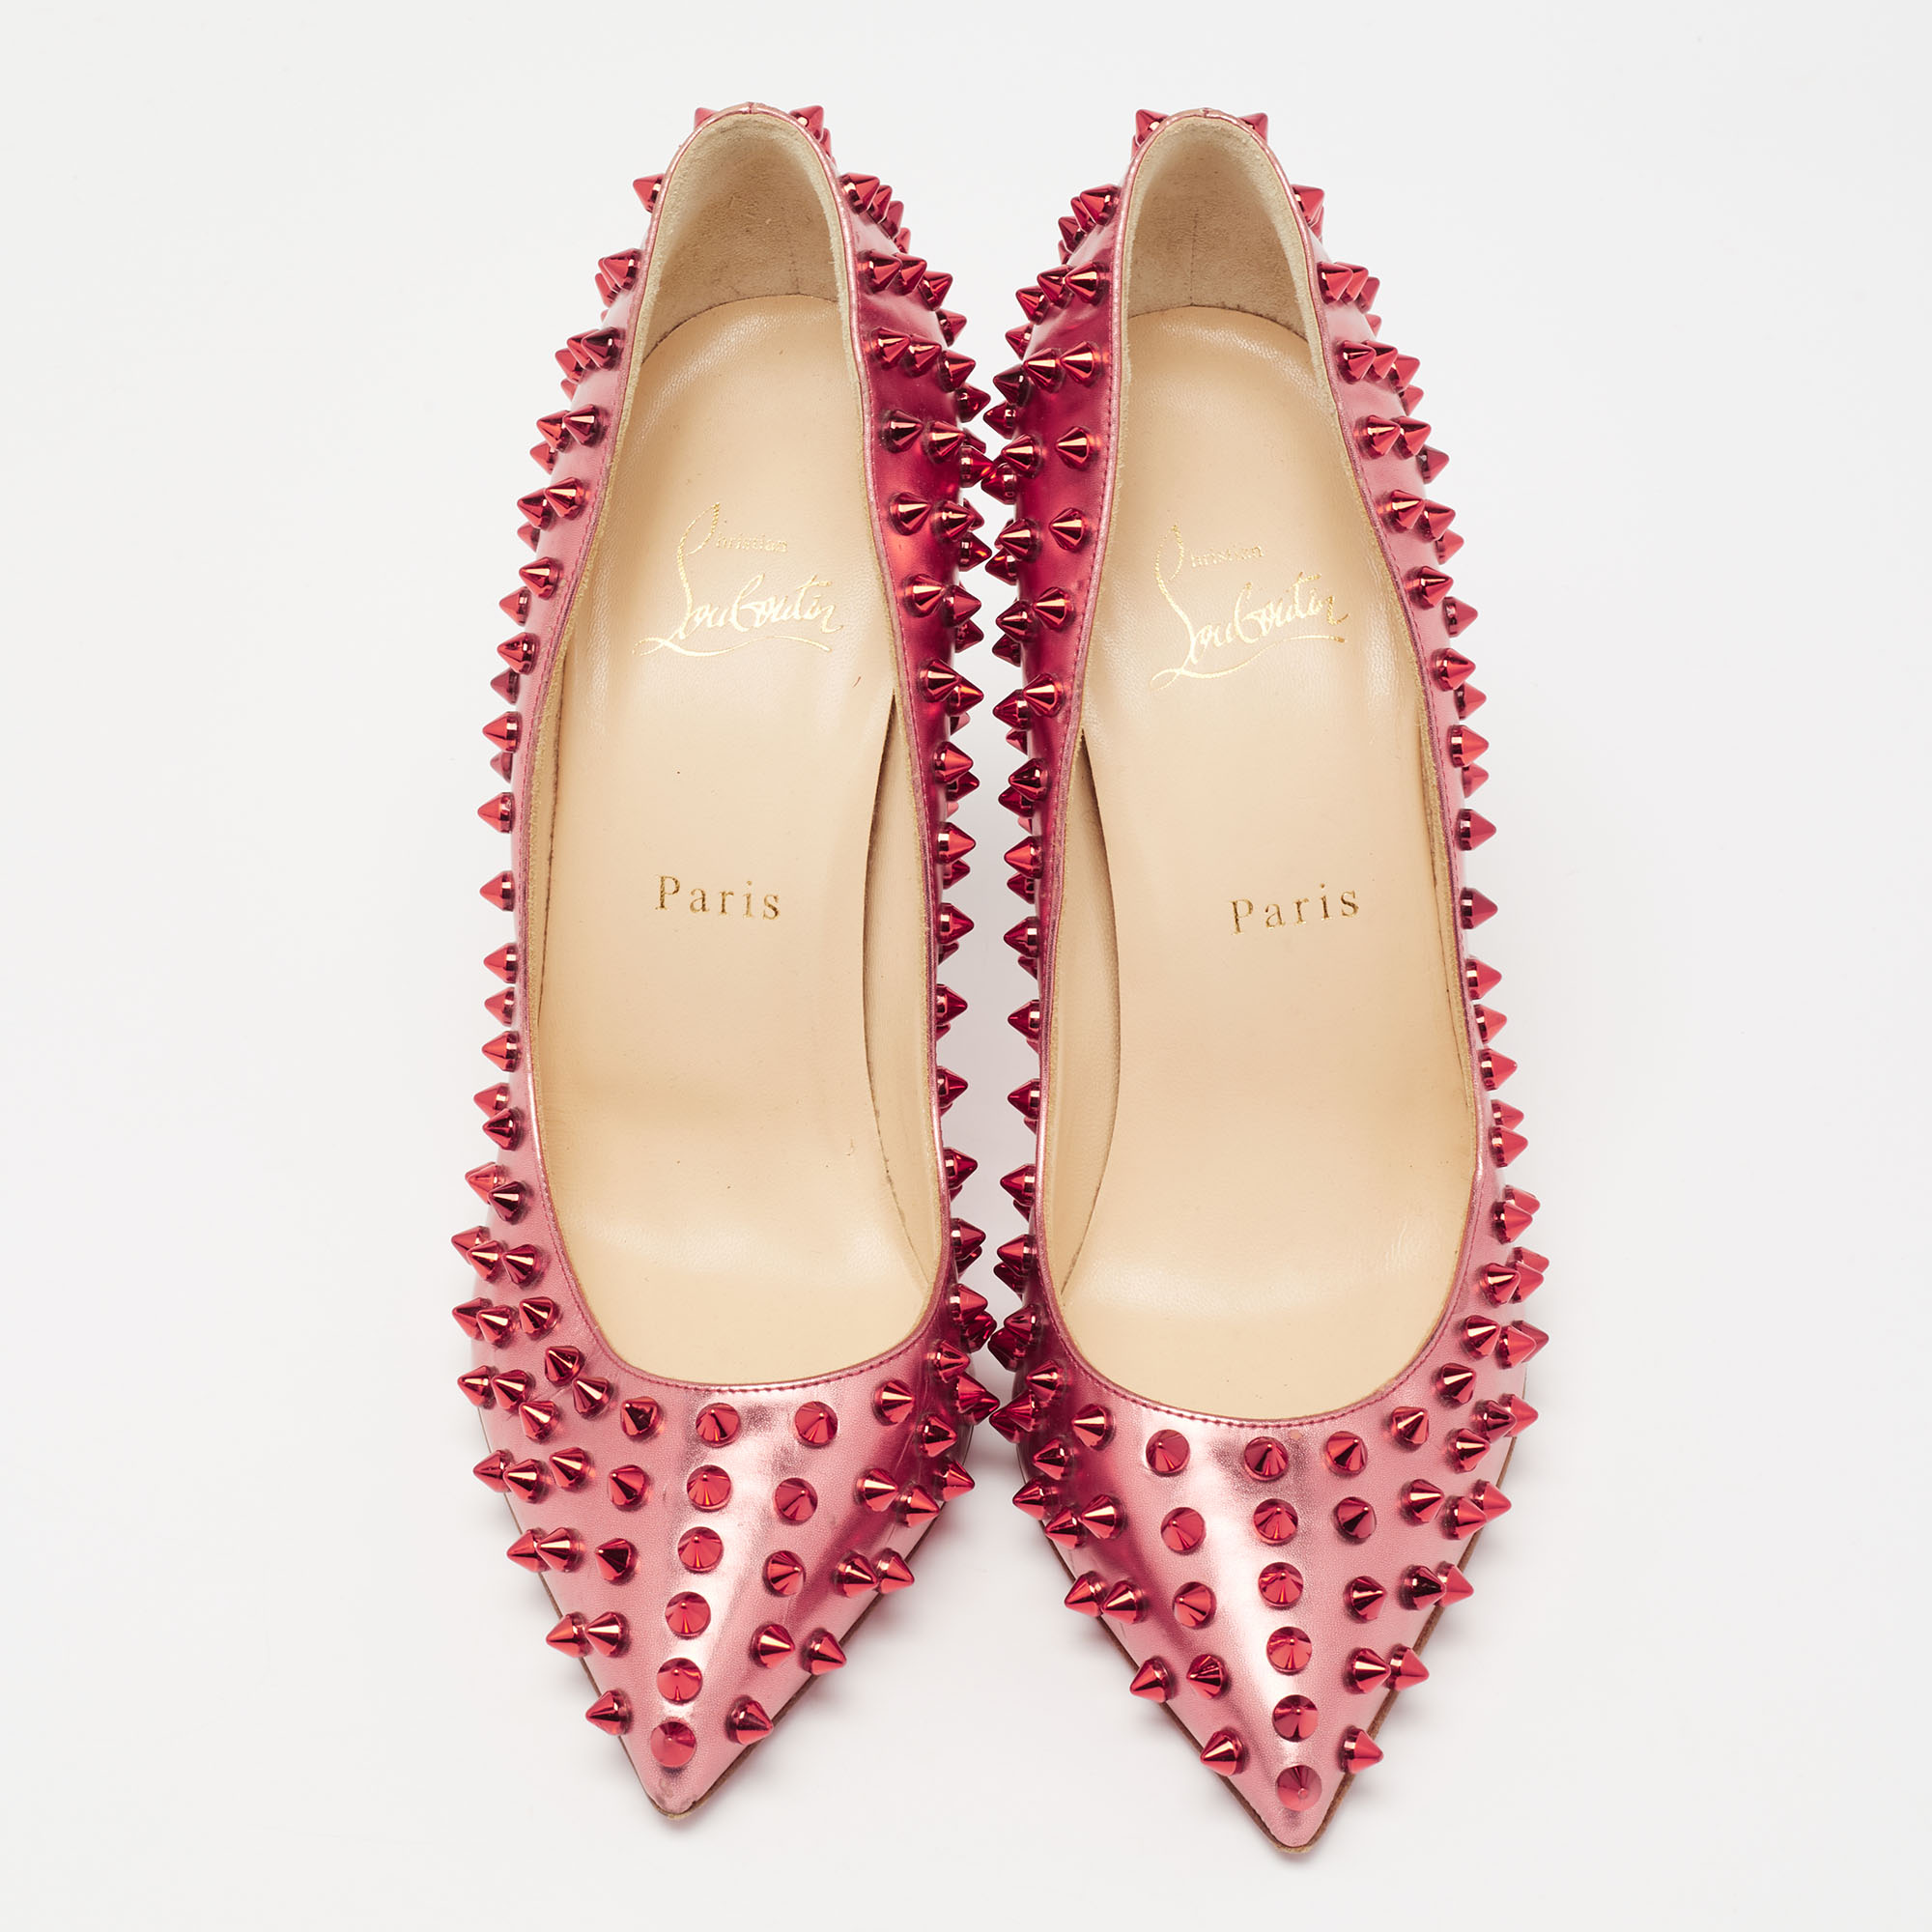 Christian Louboutin Two-Tone Metallic Leather Pigalle Spikes Pumps Size 38.5